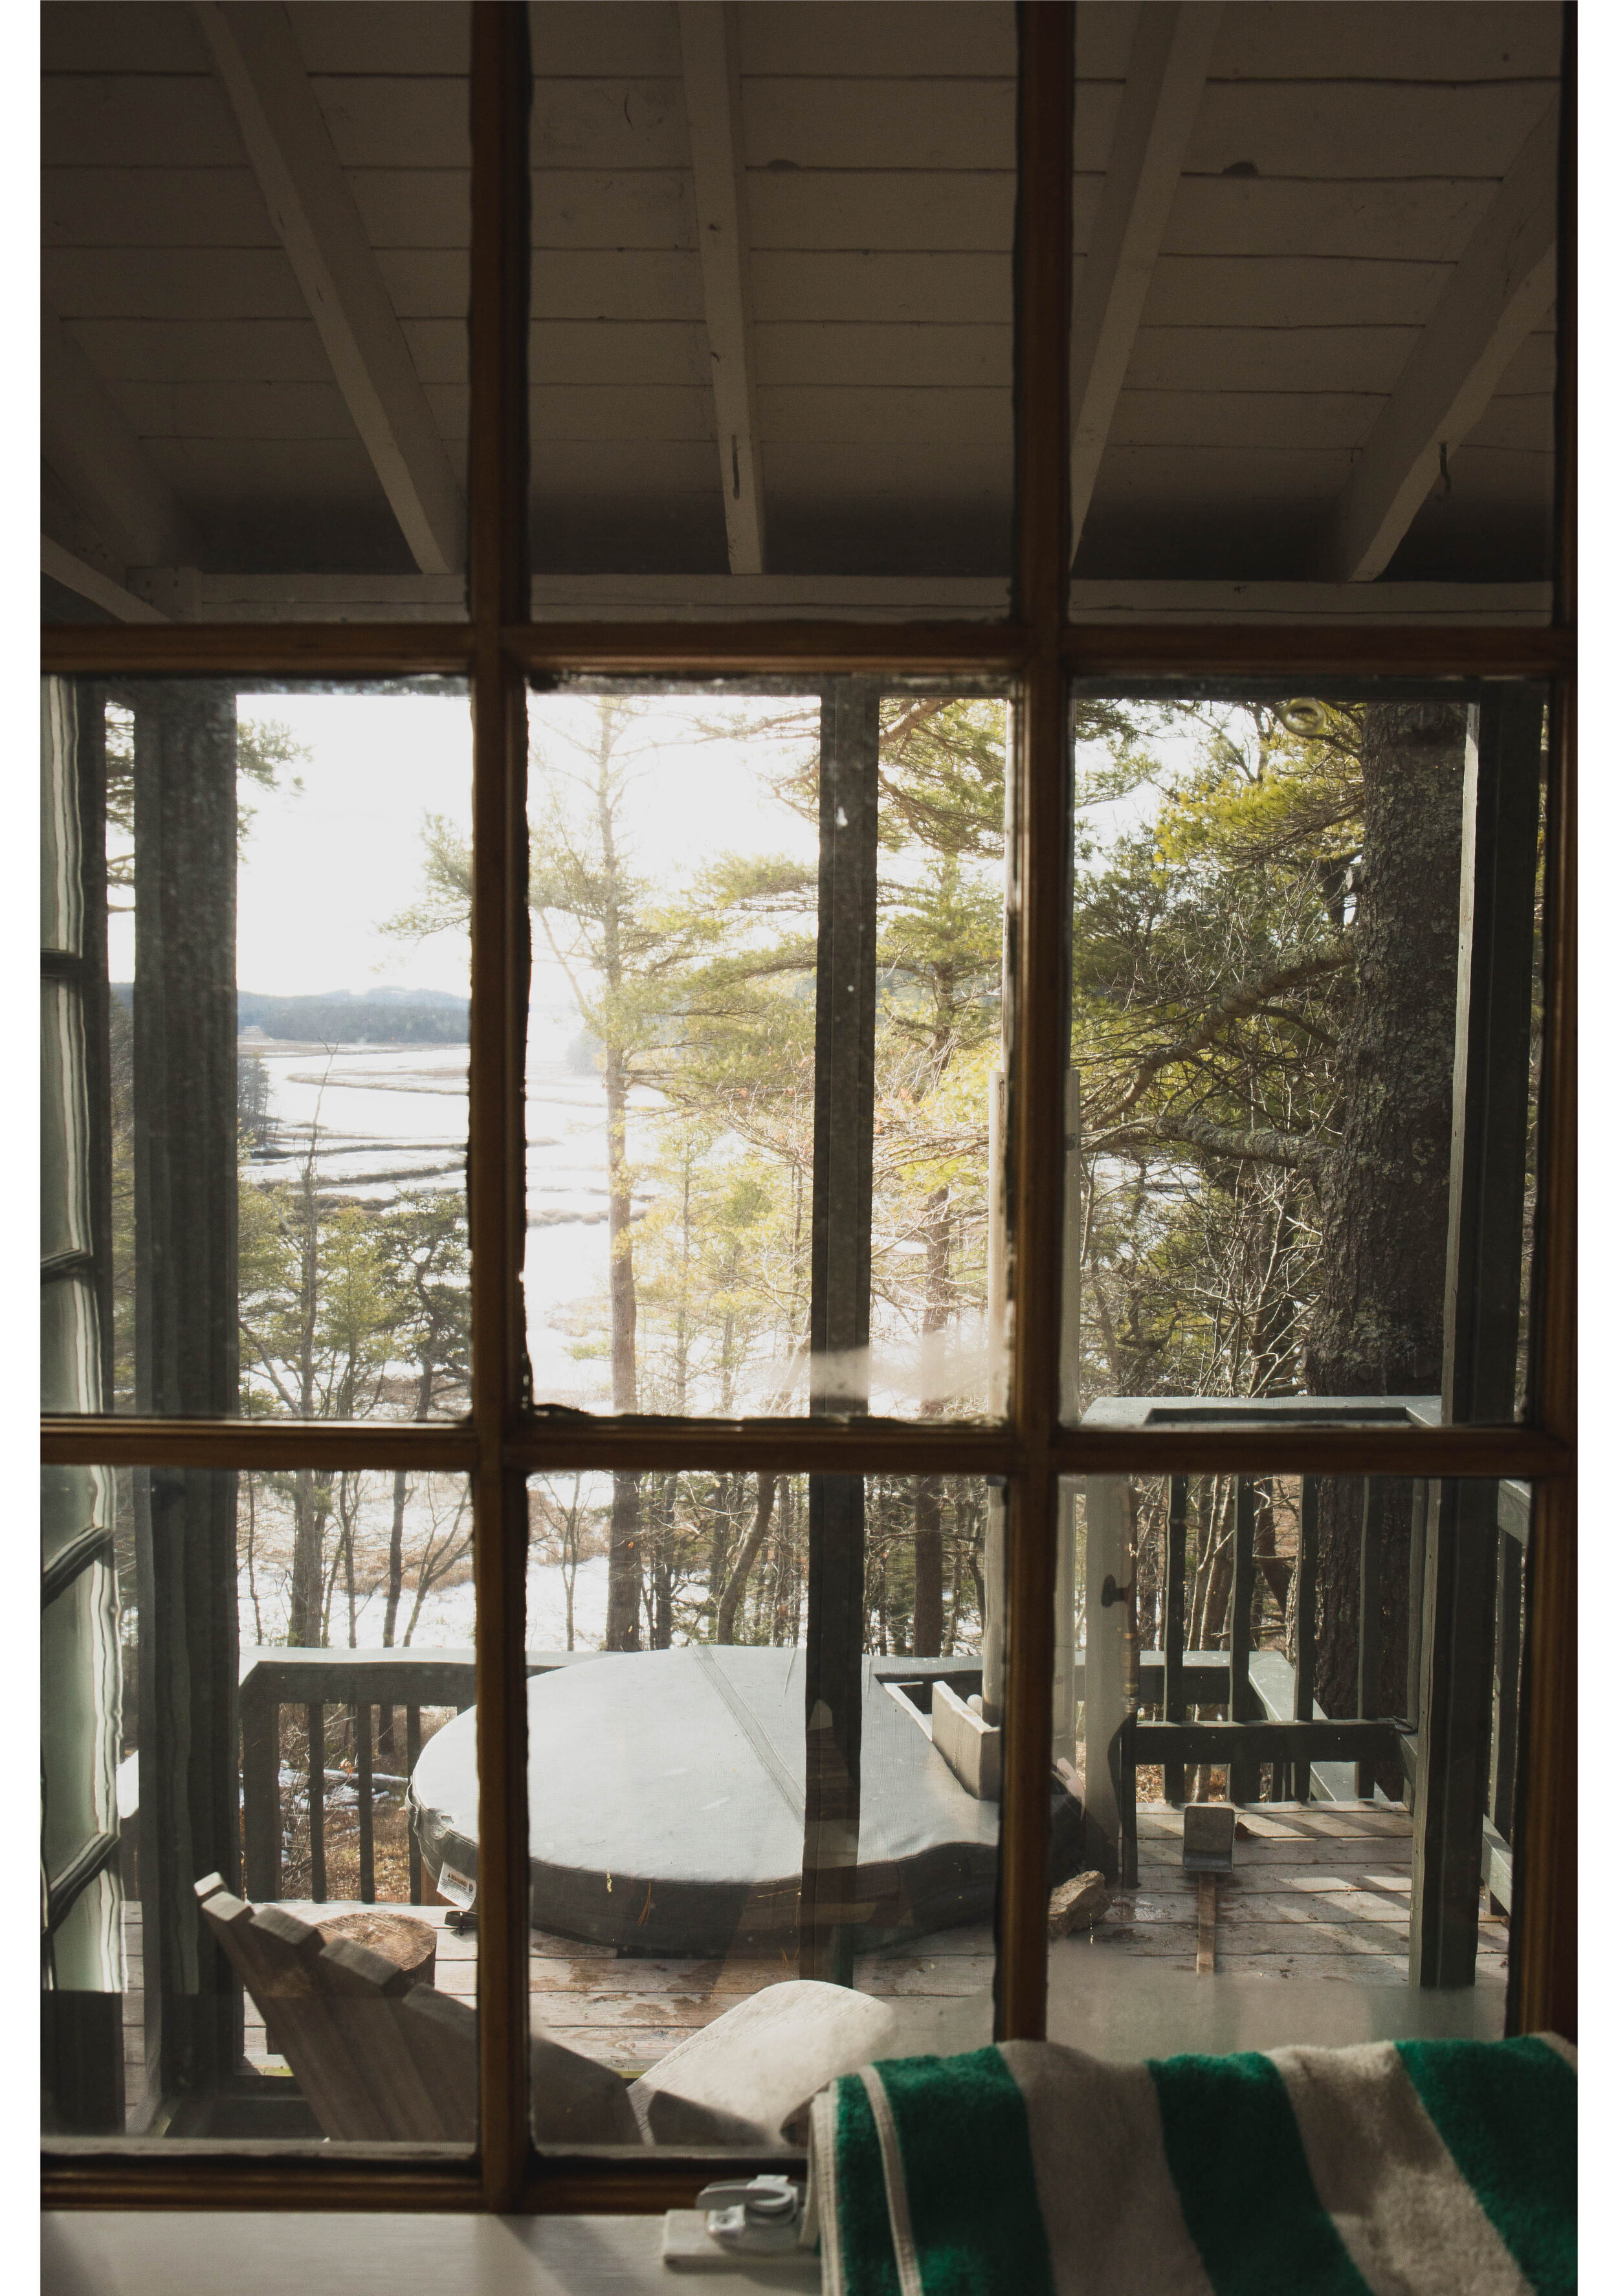 Seguin Treehouse Window View Screened in Porch Hot tub